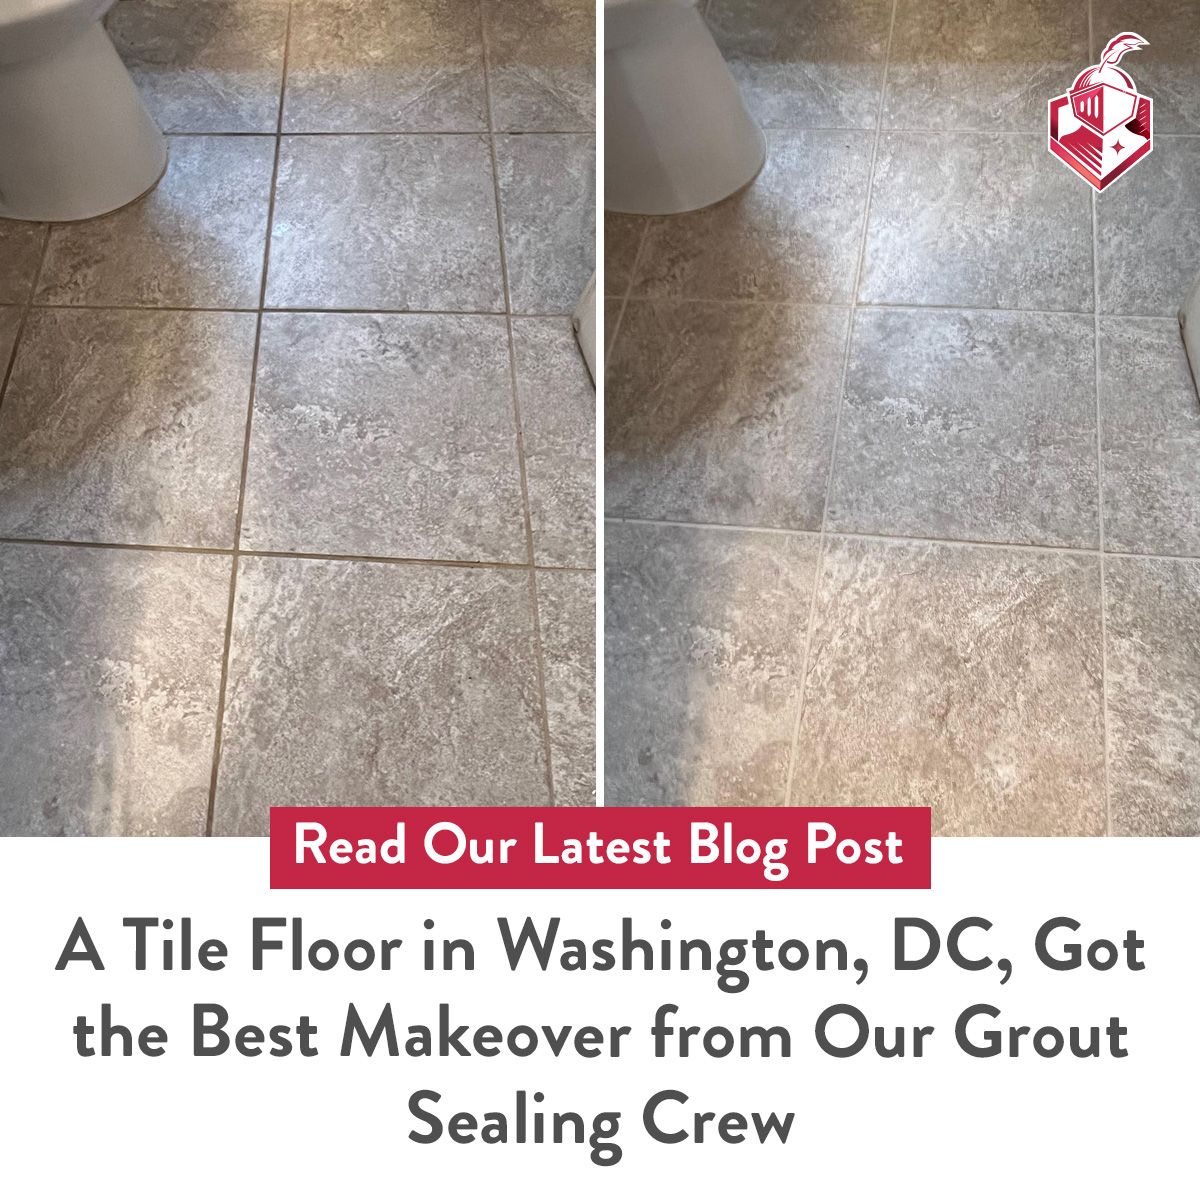 A Tile Floor in Washington, DC, Got the Best Makeover from Our Grout Sealing Crew